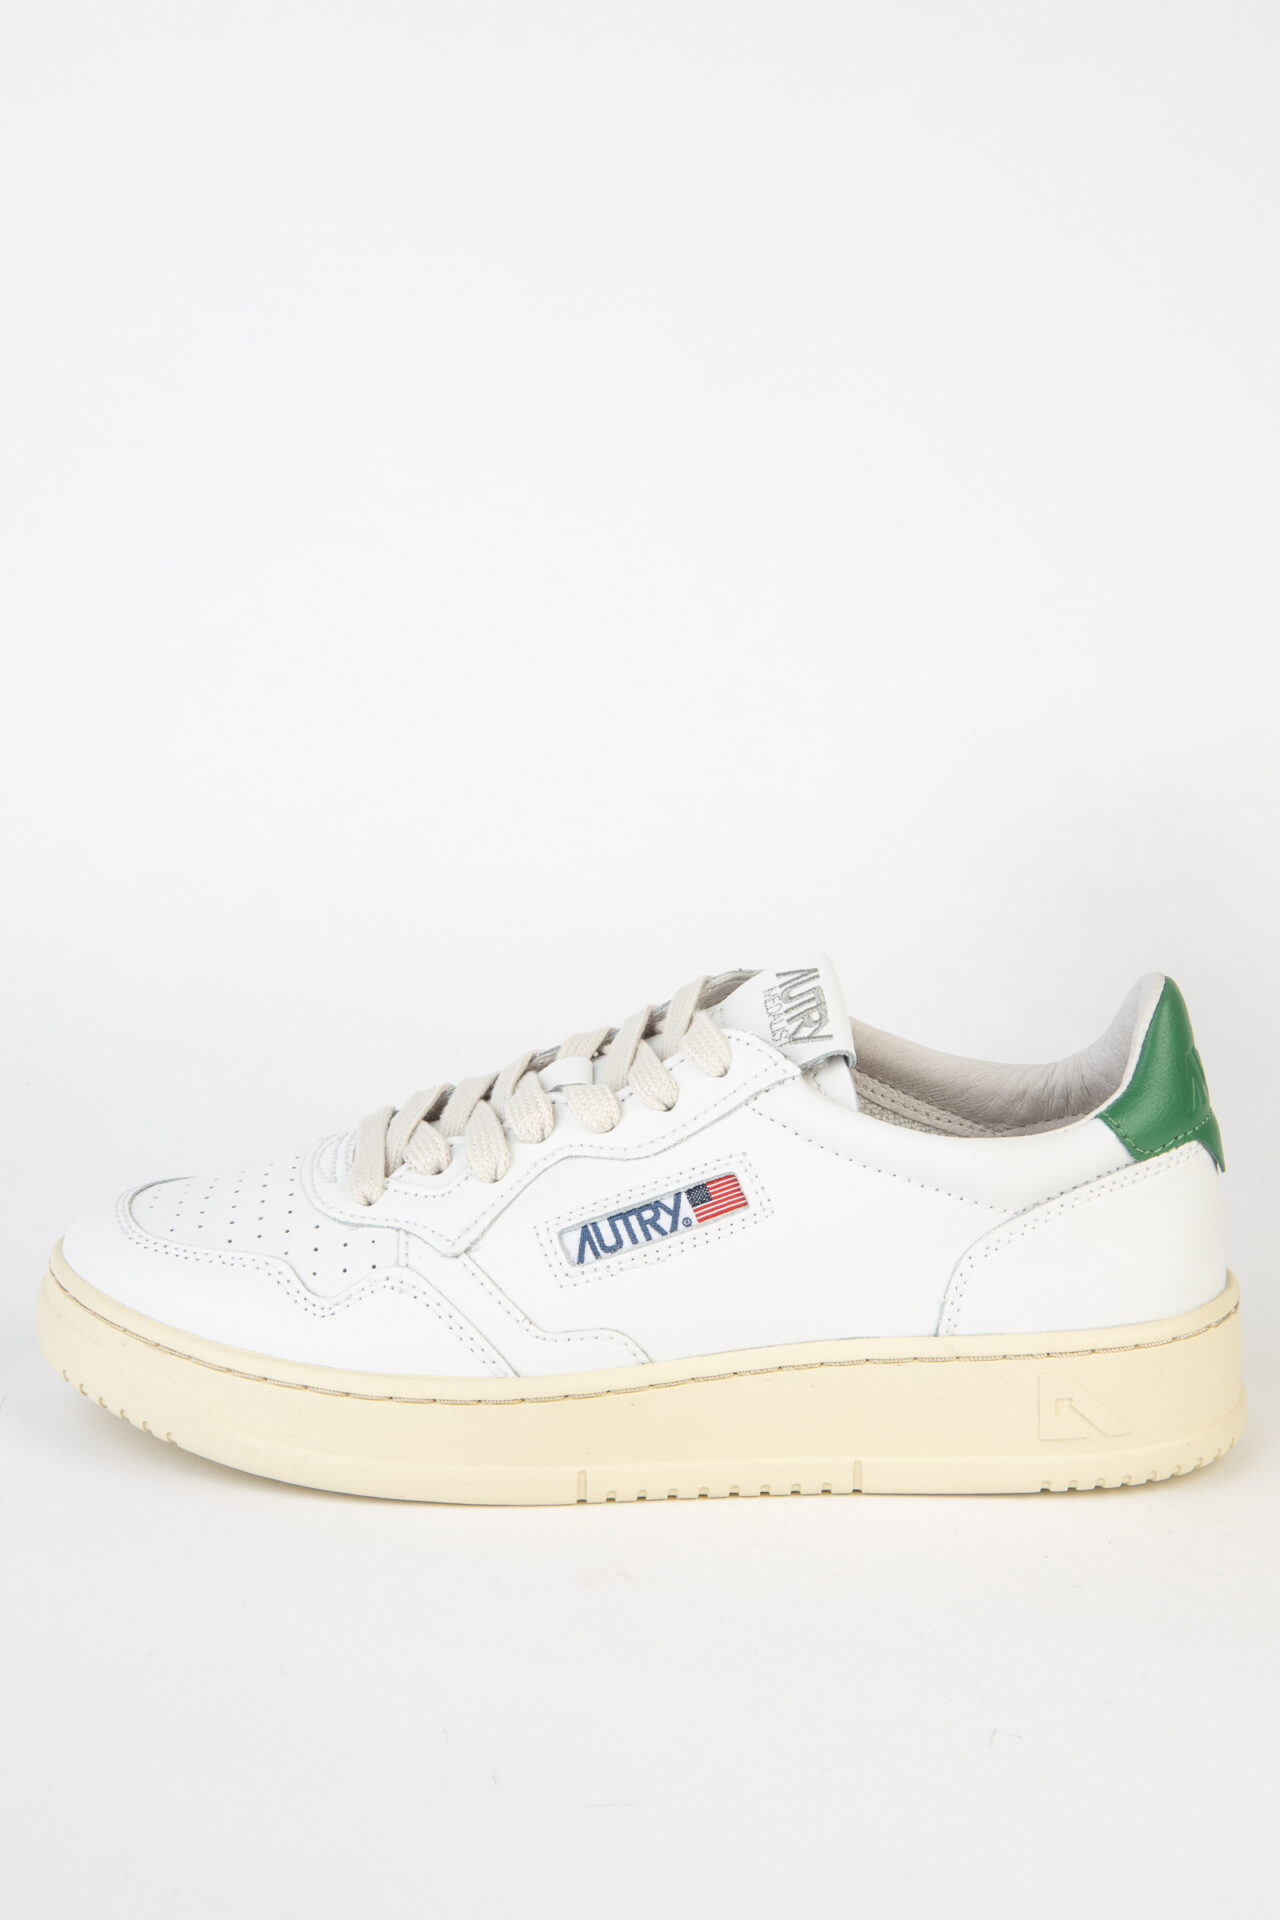 “Medalist LL20” sneaker in white/green (women’s) made of leather